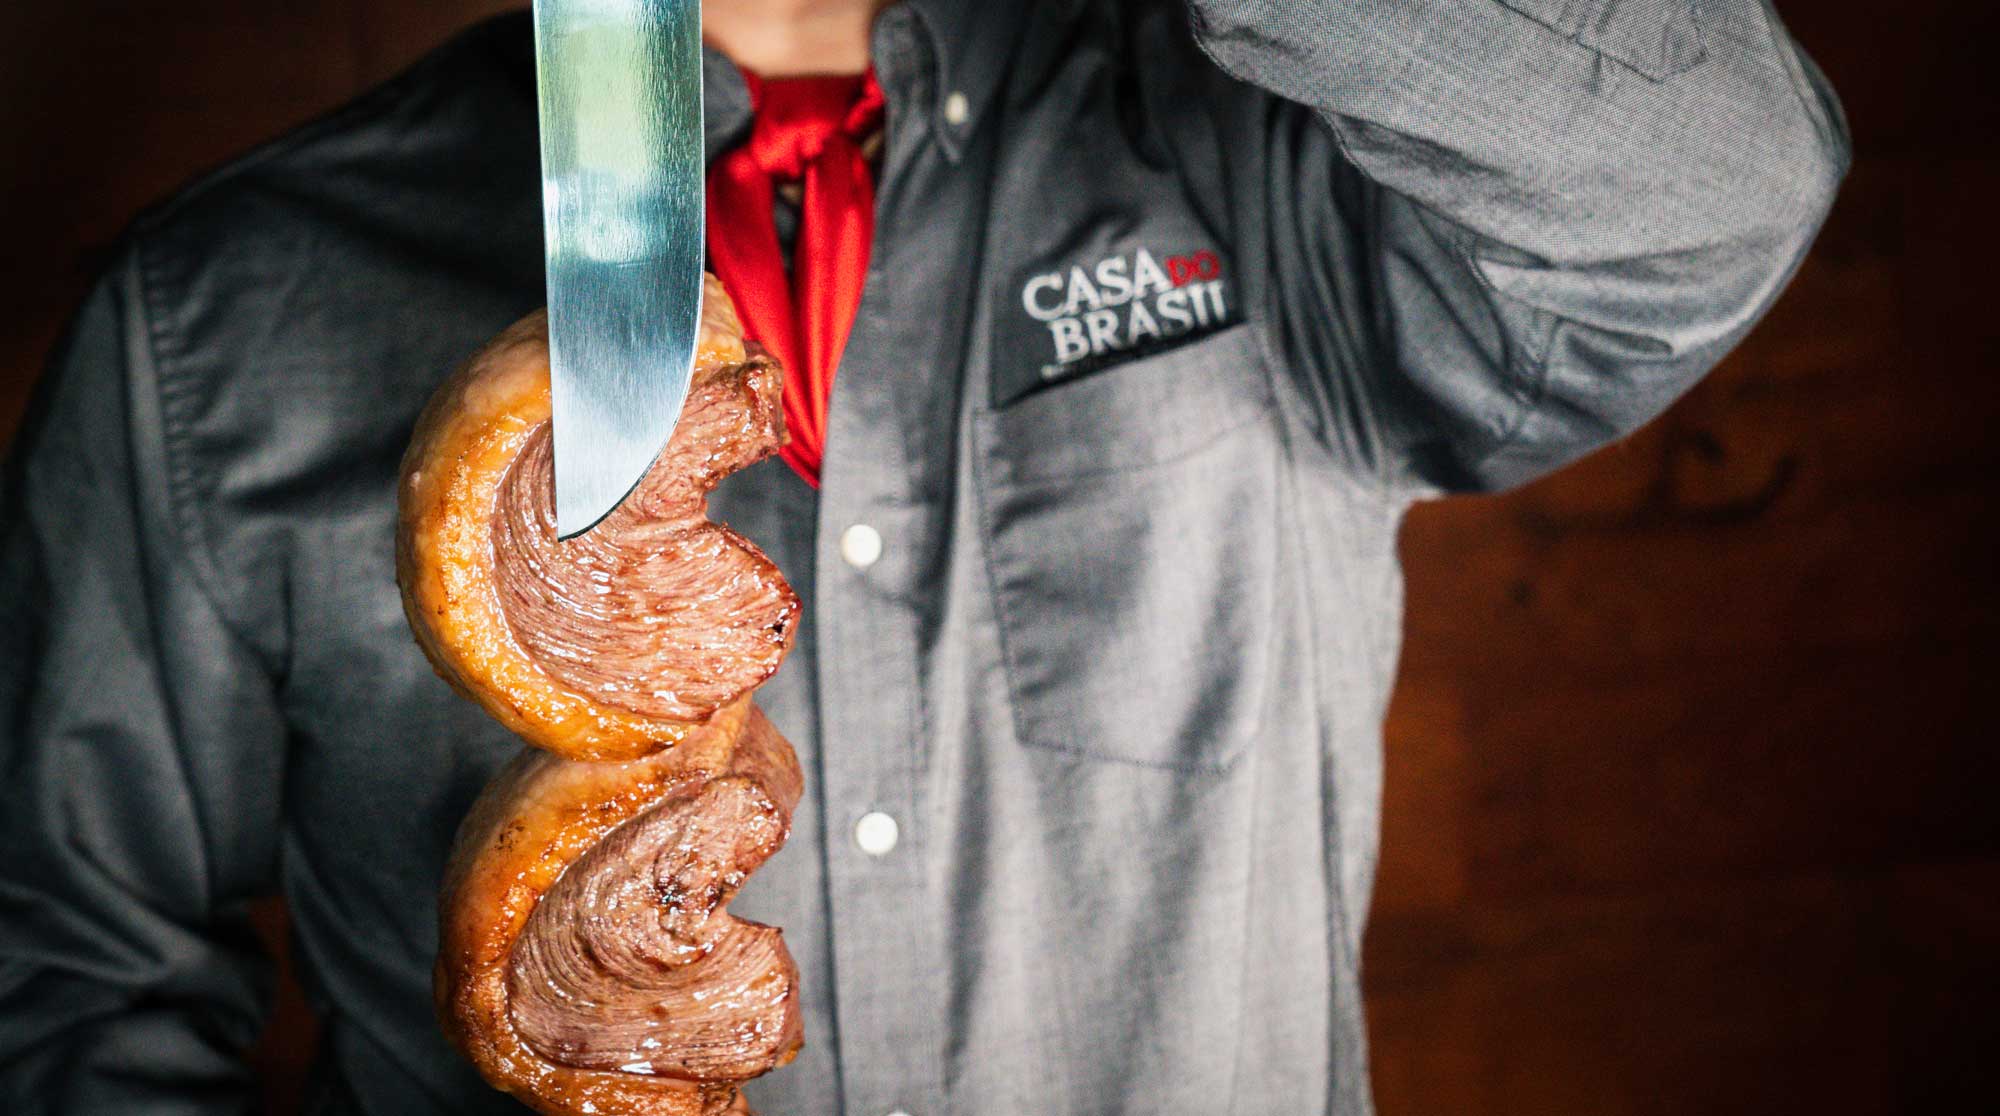 Casa Do Brasil - Austin on Instagram: Get ready for a flavor explosion  with our tender, mouth-watering, cooked to perfection beef ribs! 🥩